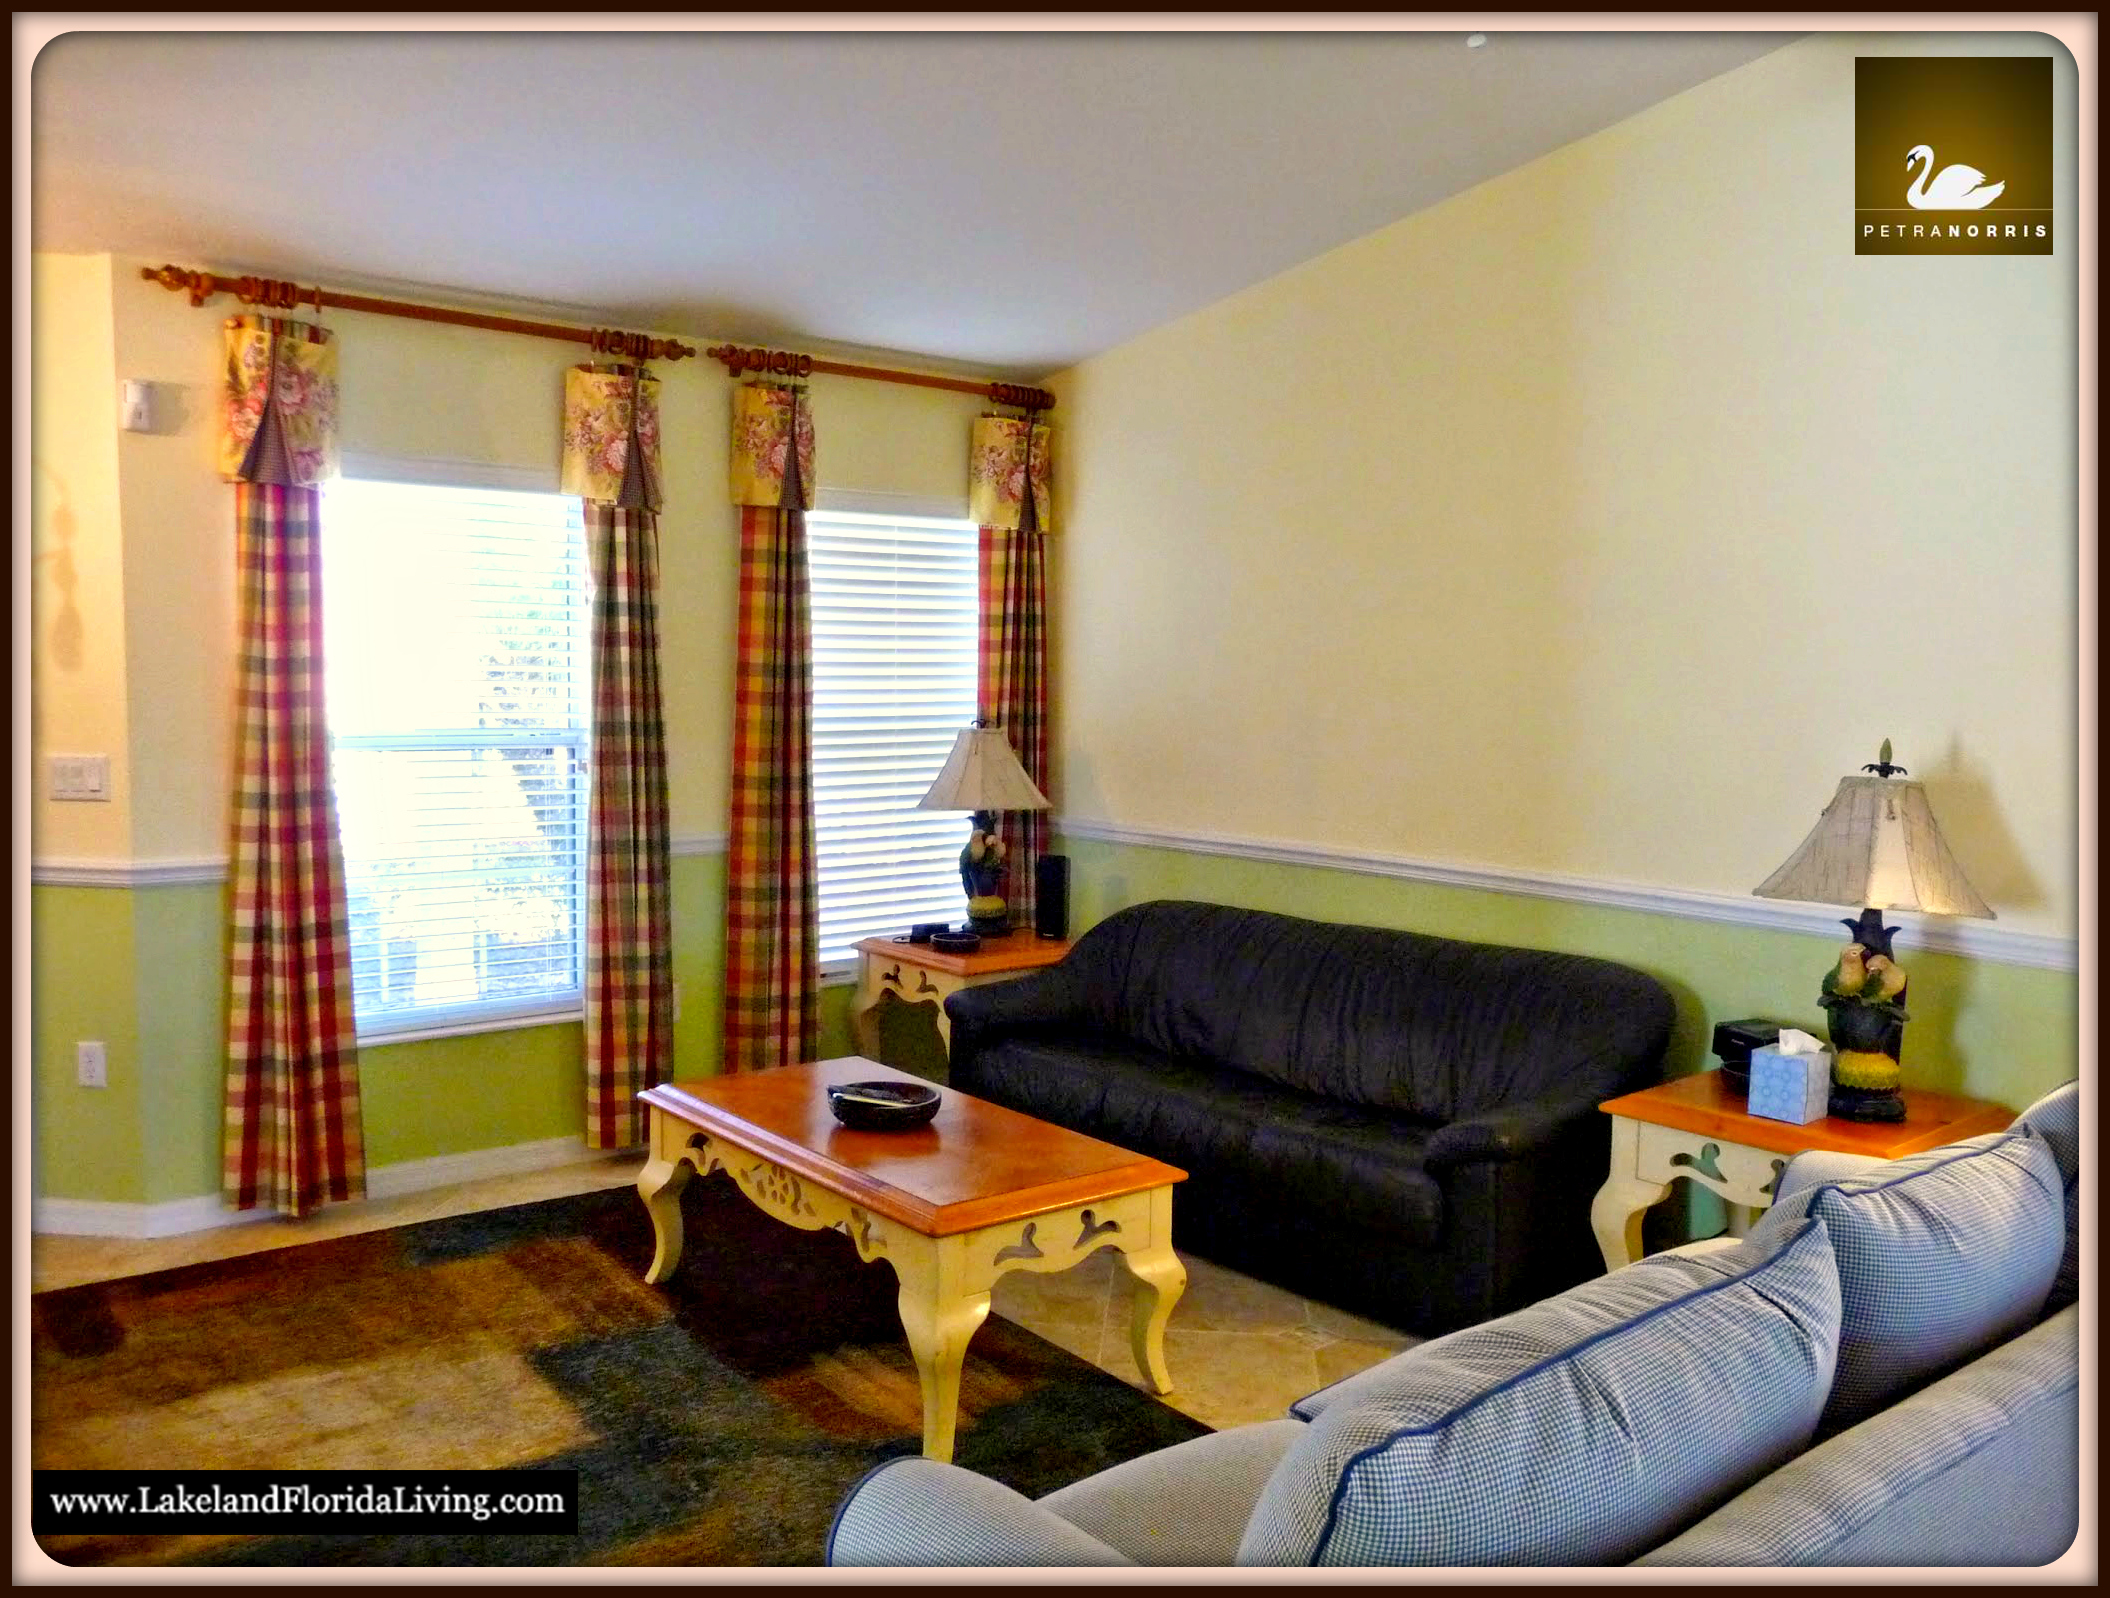 Home for Sale in Solivita Community FL - 213 Grand Canal Dr - 004 Living Room 2